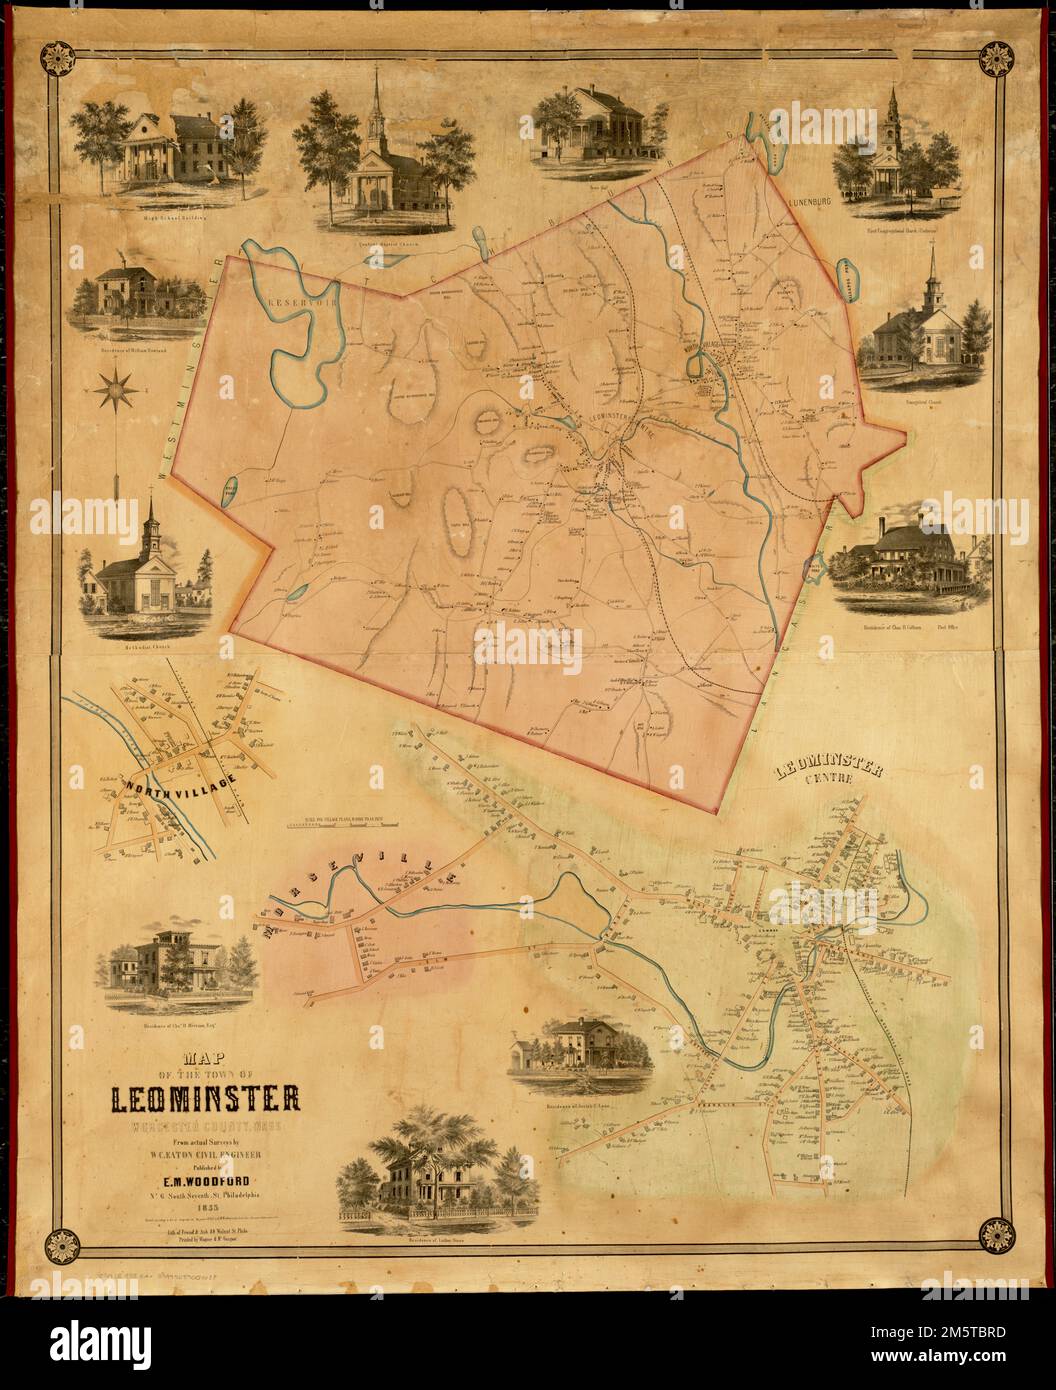 Map of the town of Leominster : Worcester County, Mass. Relief shown by hachures. Includes eleven ill. Details of Leominster centre, Morseville and North Village. 'Lith of Friend & Aub.' 'Printed by Wagner & McGuigan.'... , Massachusetts  , Worcester  ,county   , Leominster Stock Photo